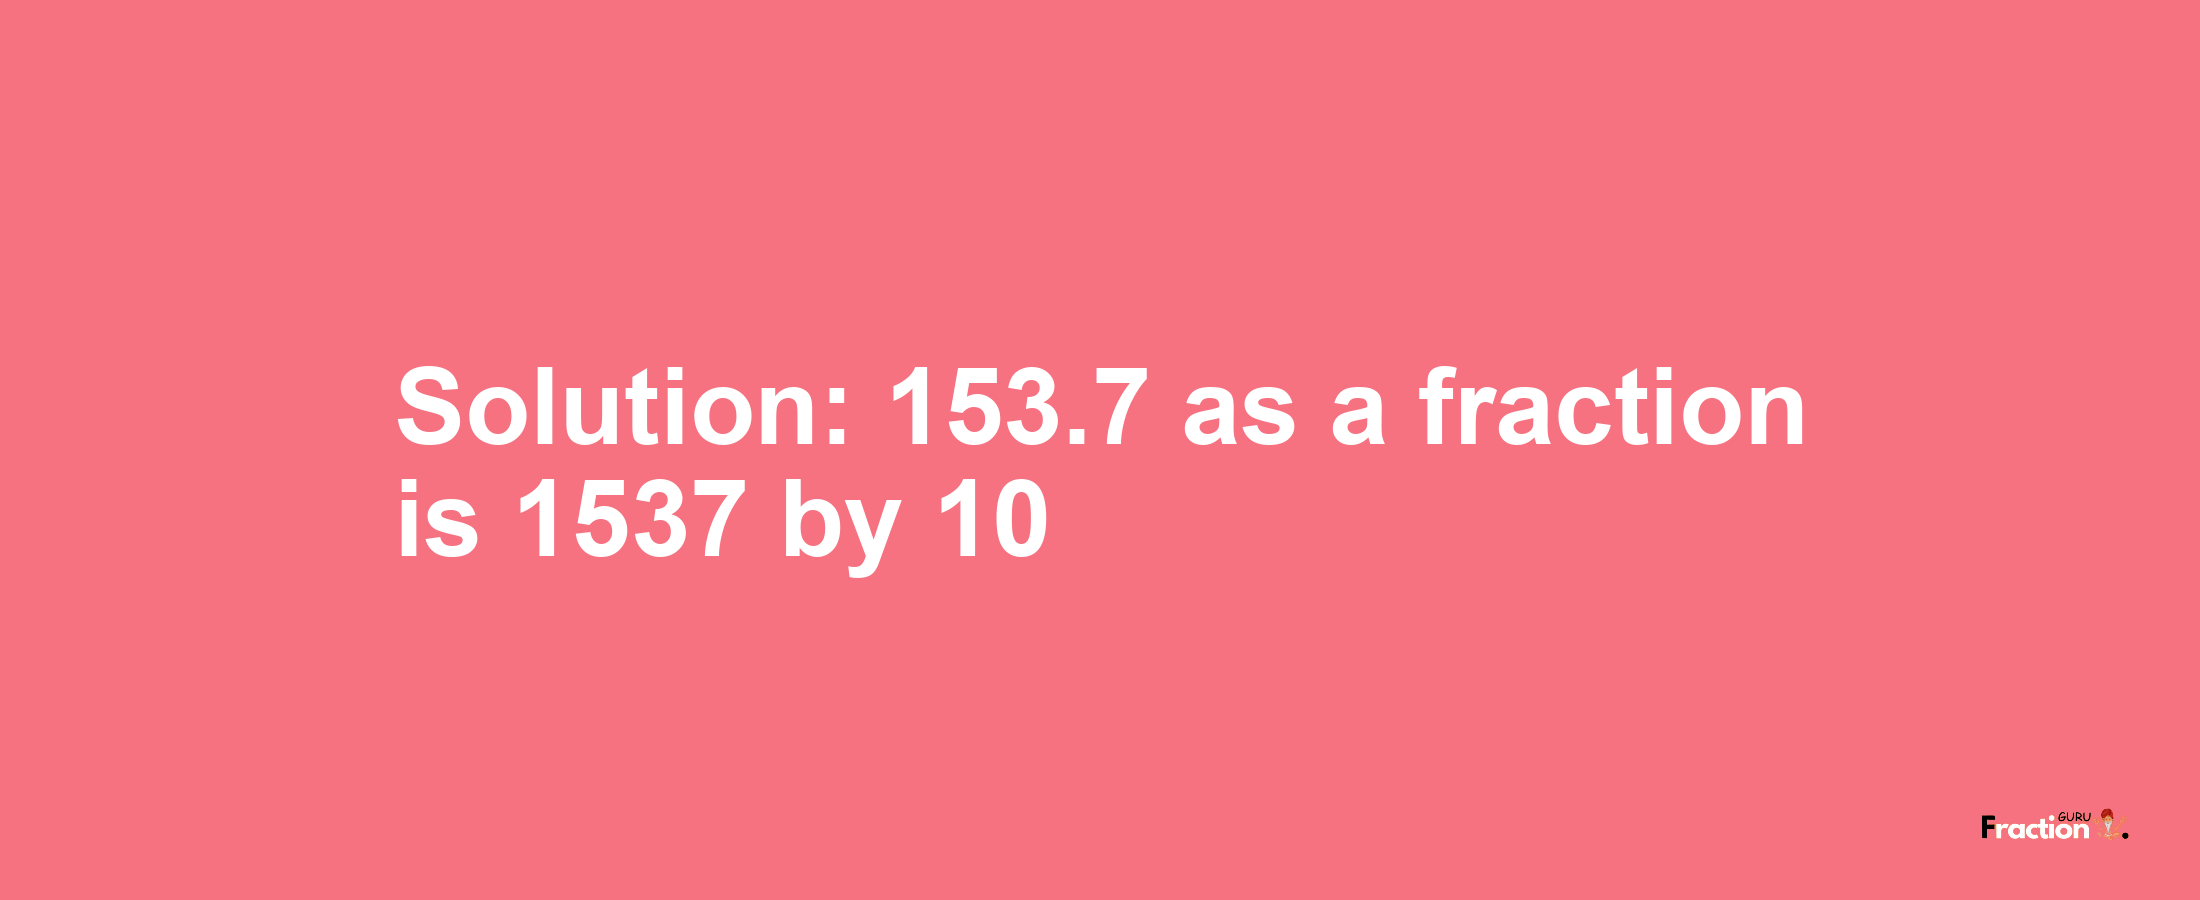 Solution:153.7 as a fraction is 1537/10